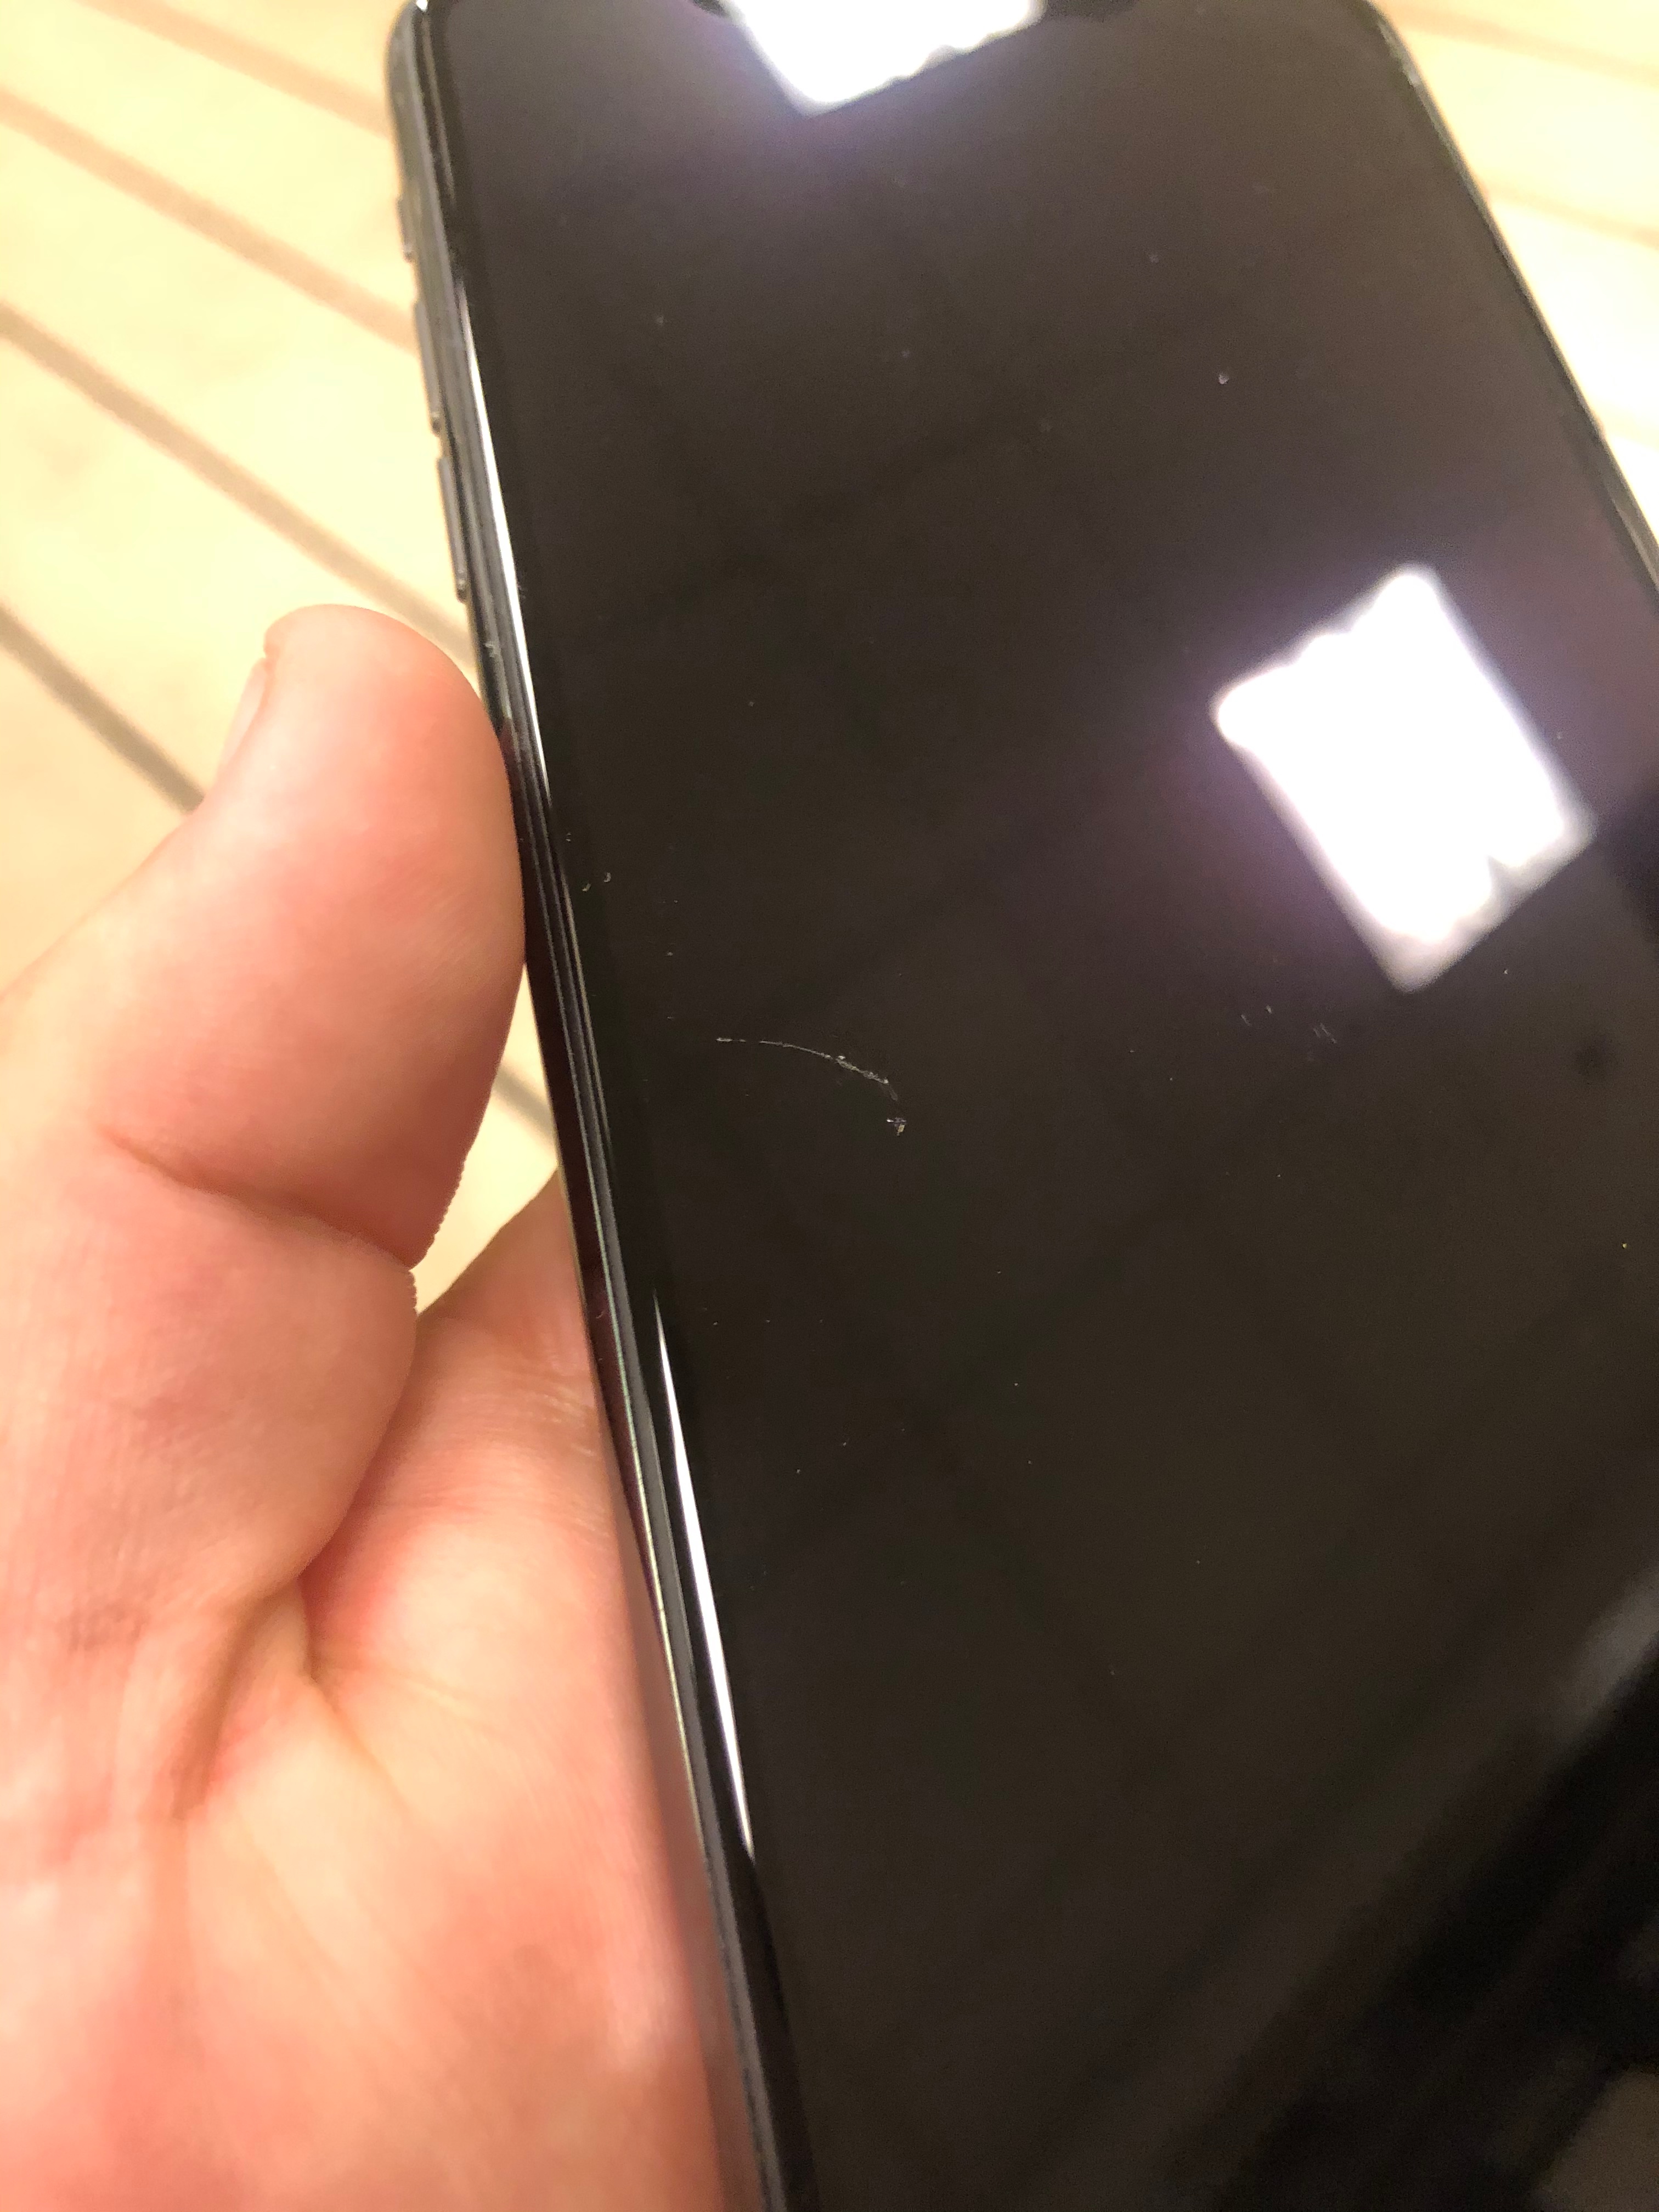 Why does my iPhone scratch so easily?